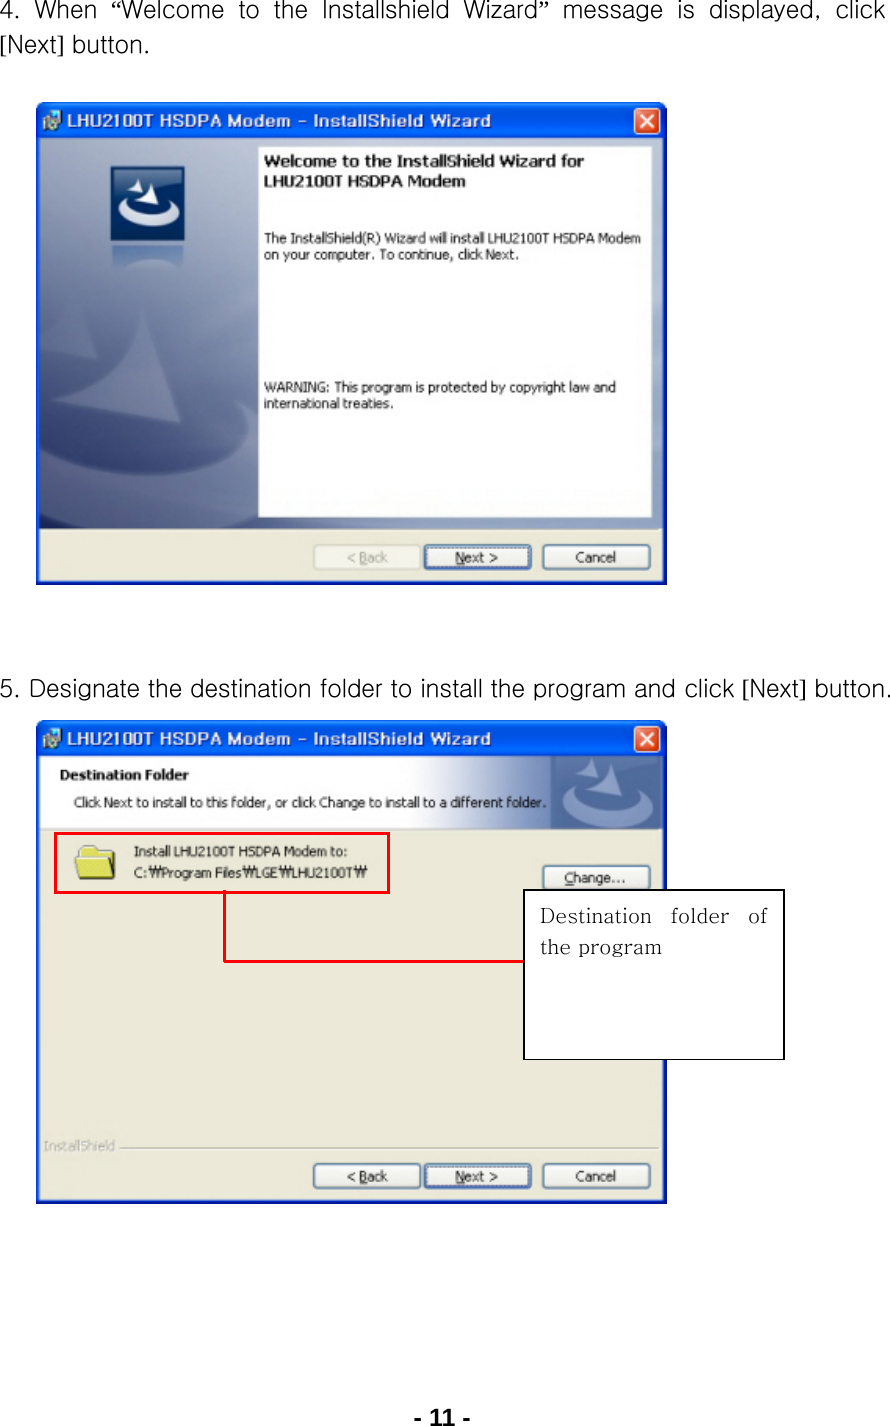 - 11 - 4.  When  “Welcome  to  the  Installshield  Wizard”  message  is  displayed,  click [Next] button.               5. Designate the destination folder to install the program and click [Next] button.              Destination  folder  of the program 